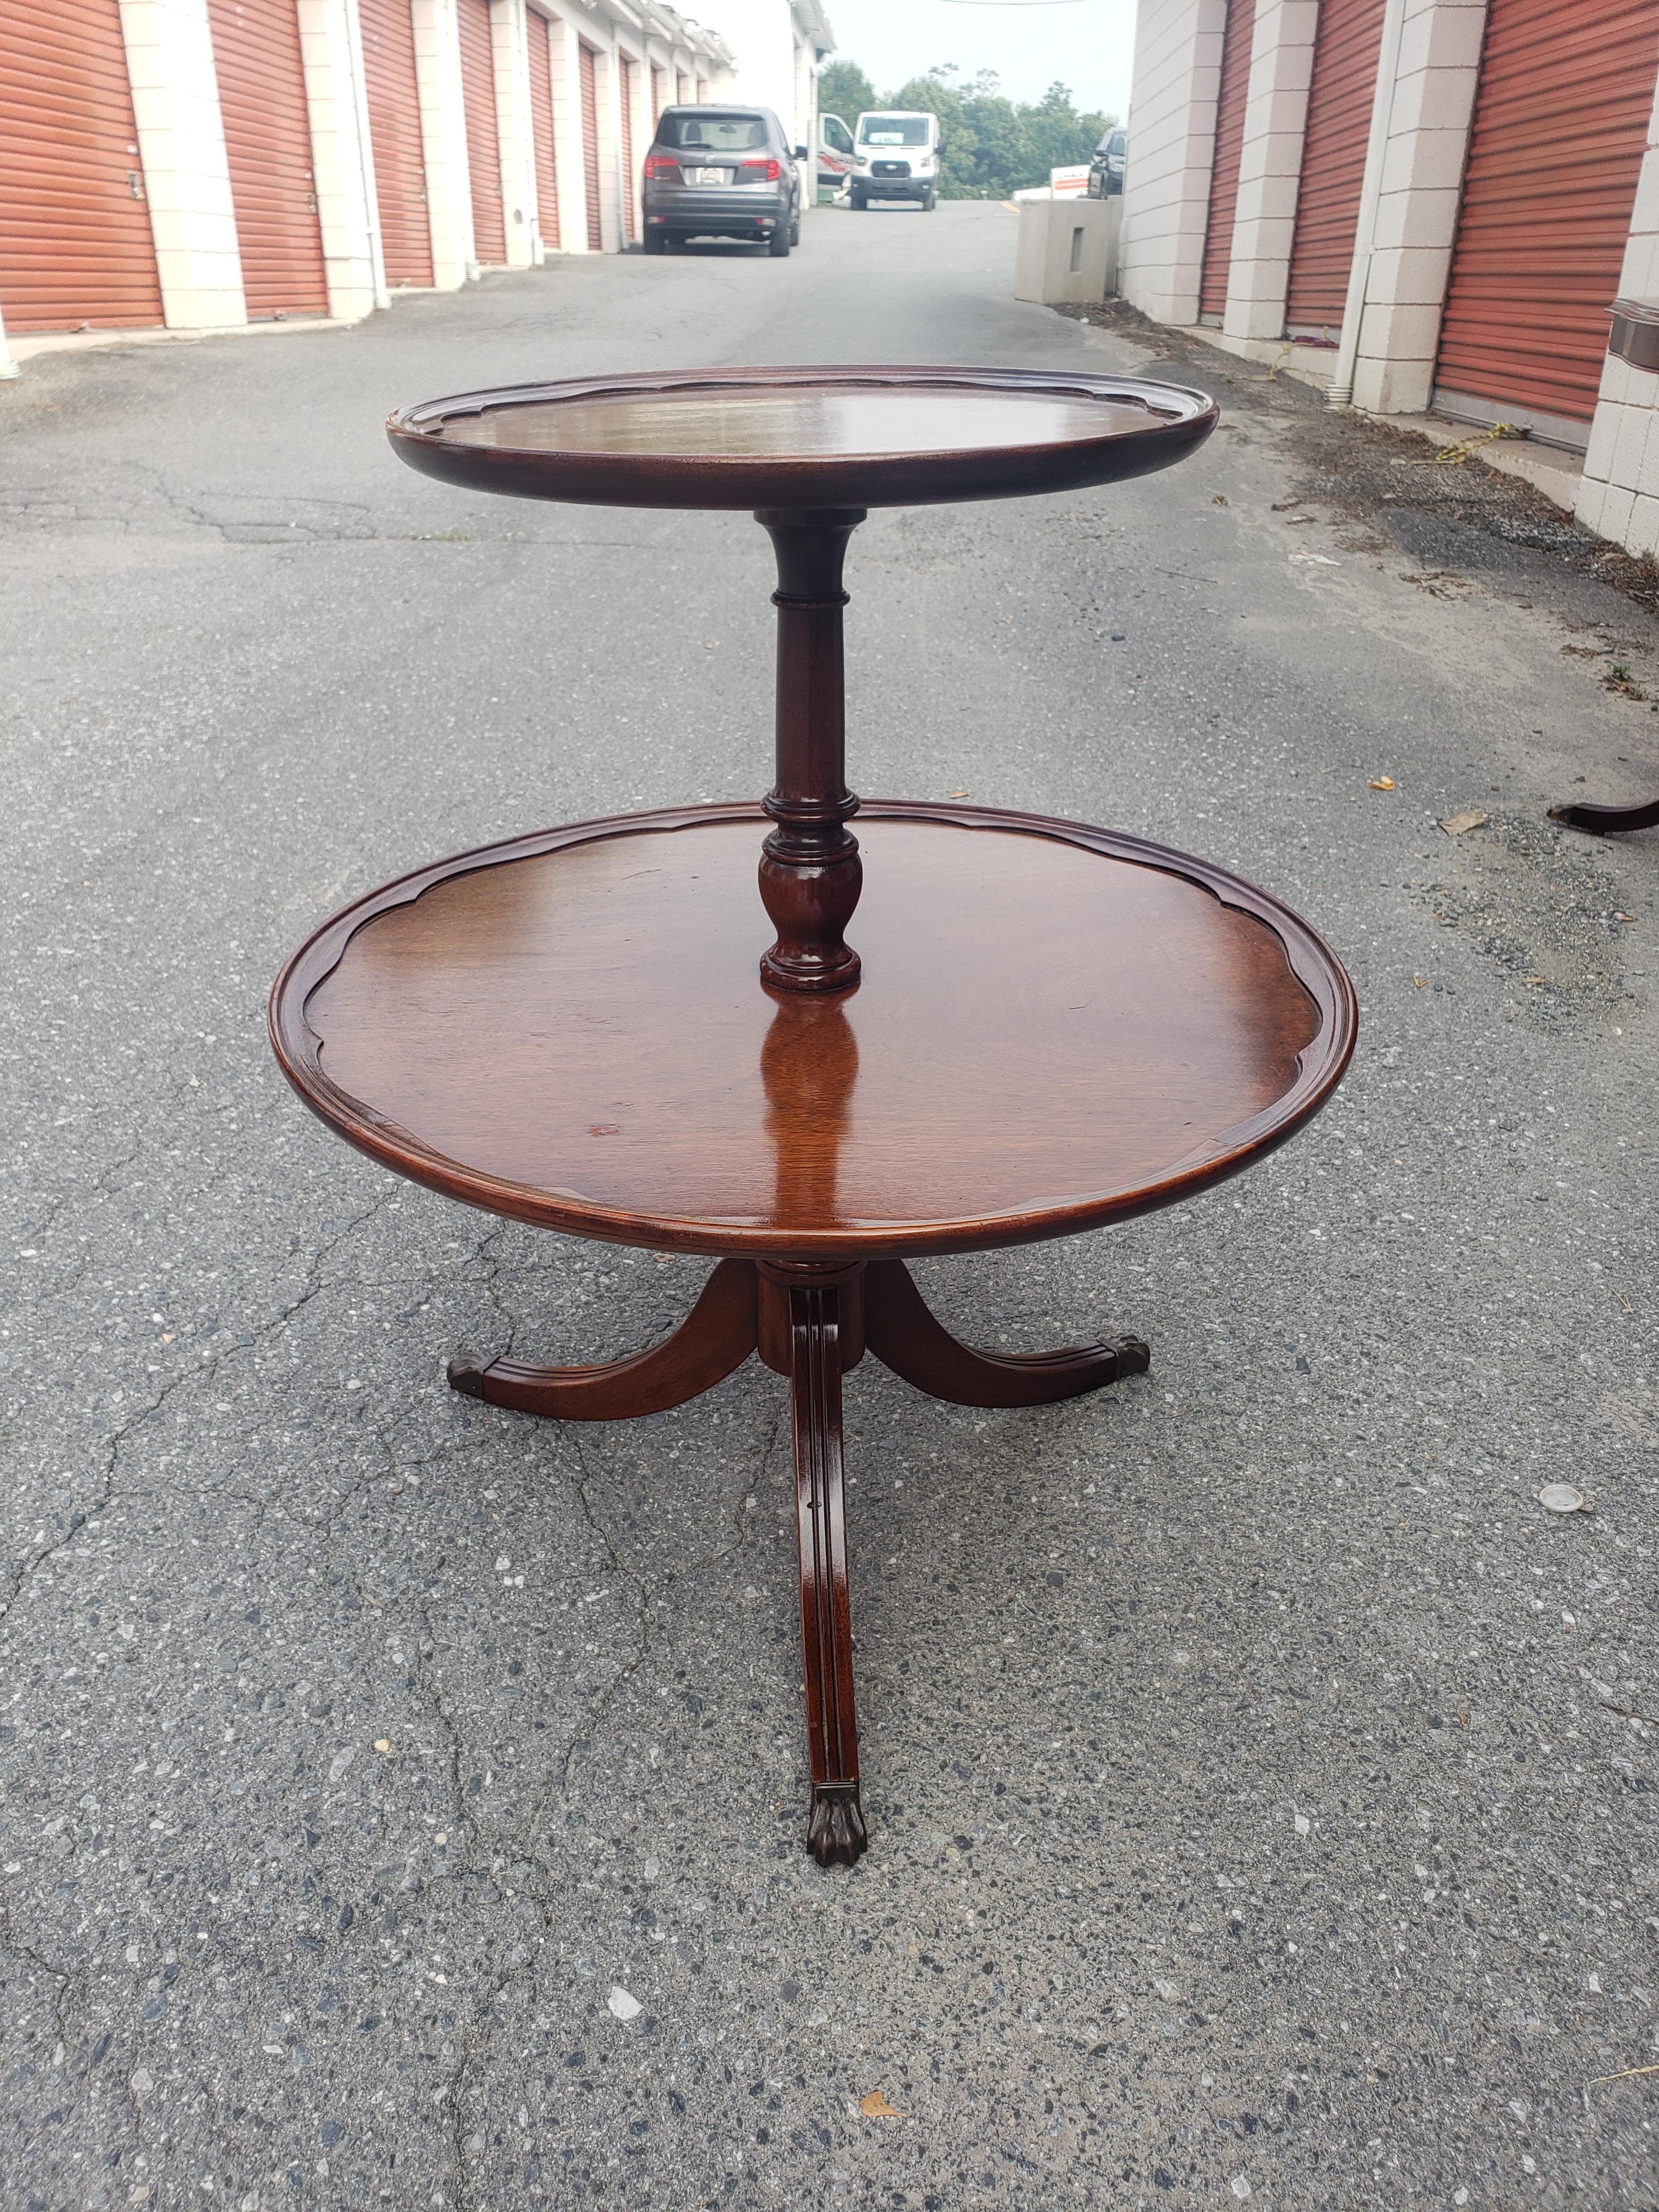 Brandt Furniture Solid Mahogany 2-Tier Tripod Pedestal Dumb Waiter Table, C 1950 In Good Condition For Sale In Germantown, MD